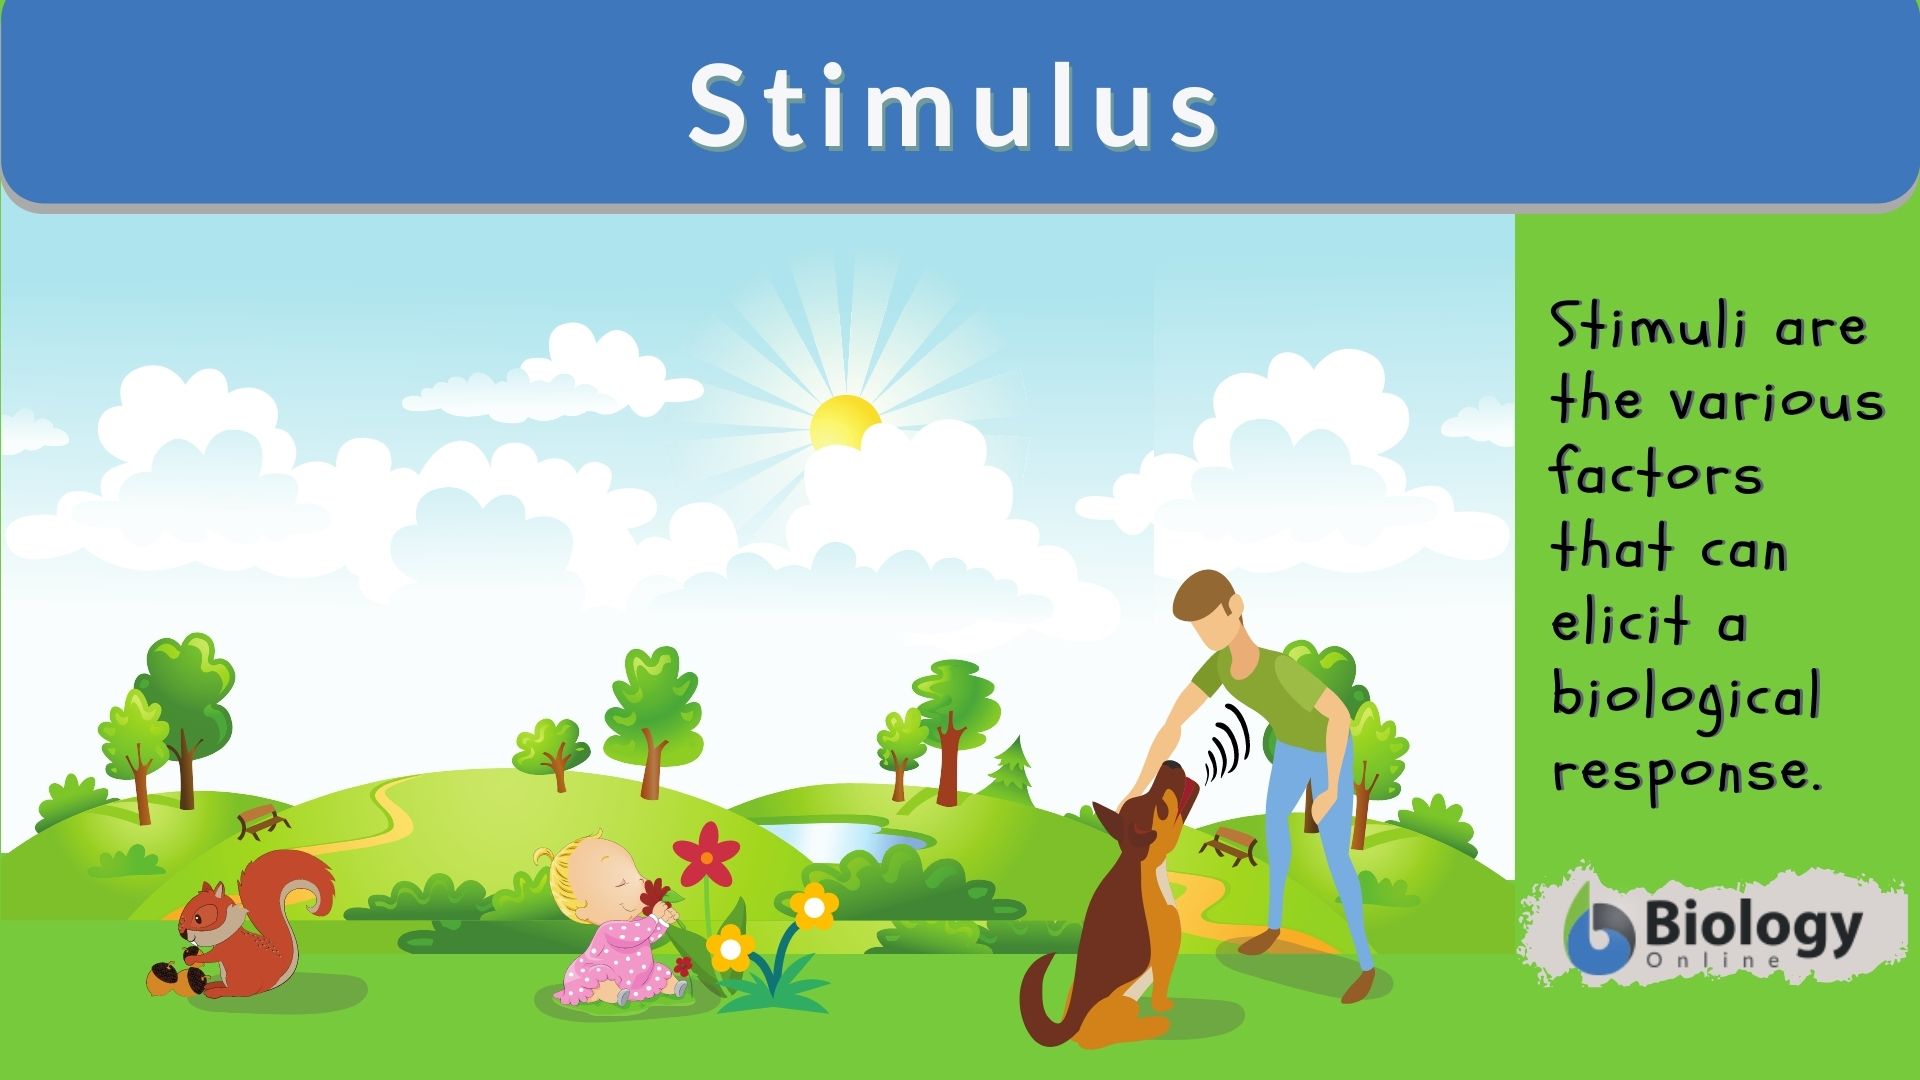 Stimulus - Definition and Examples - Biology Online Dictionary